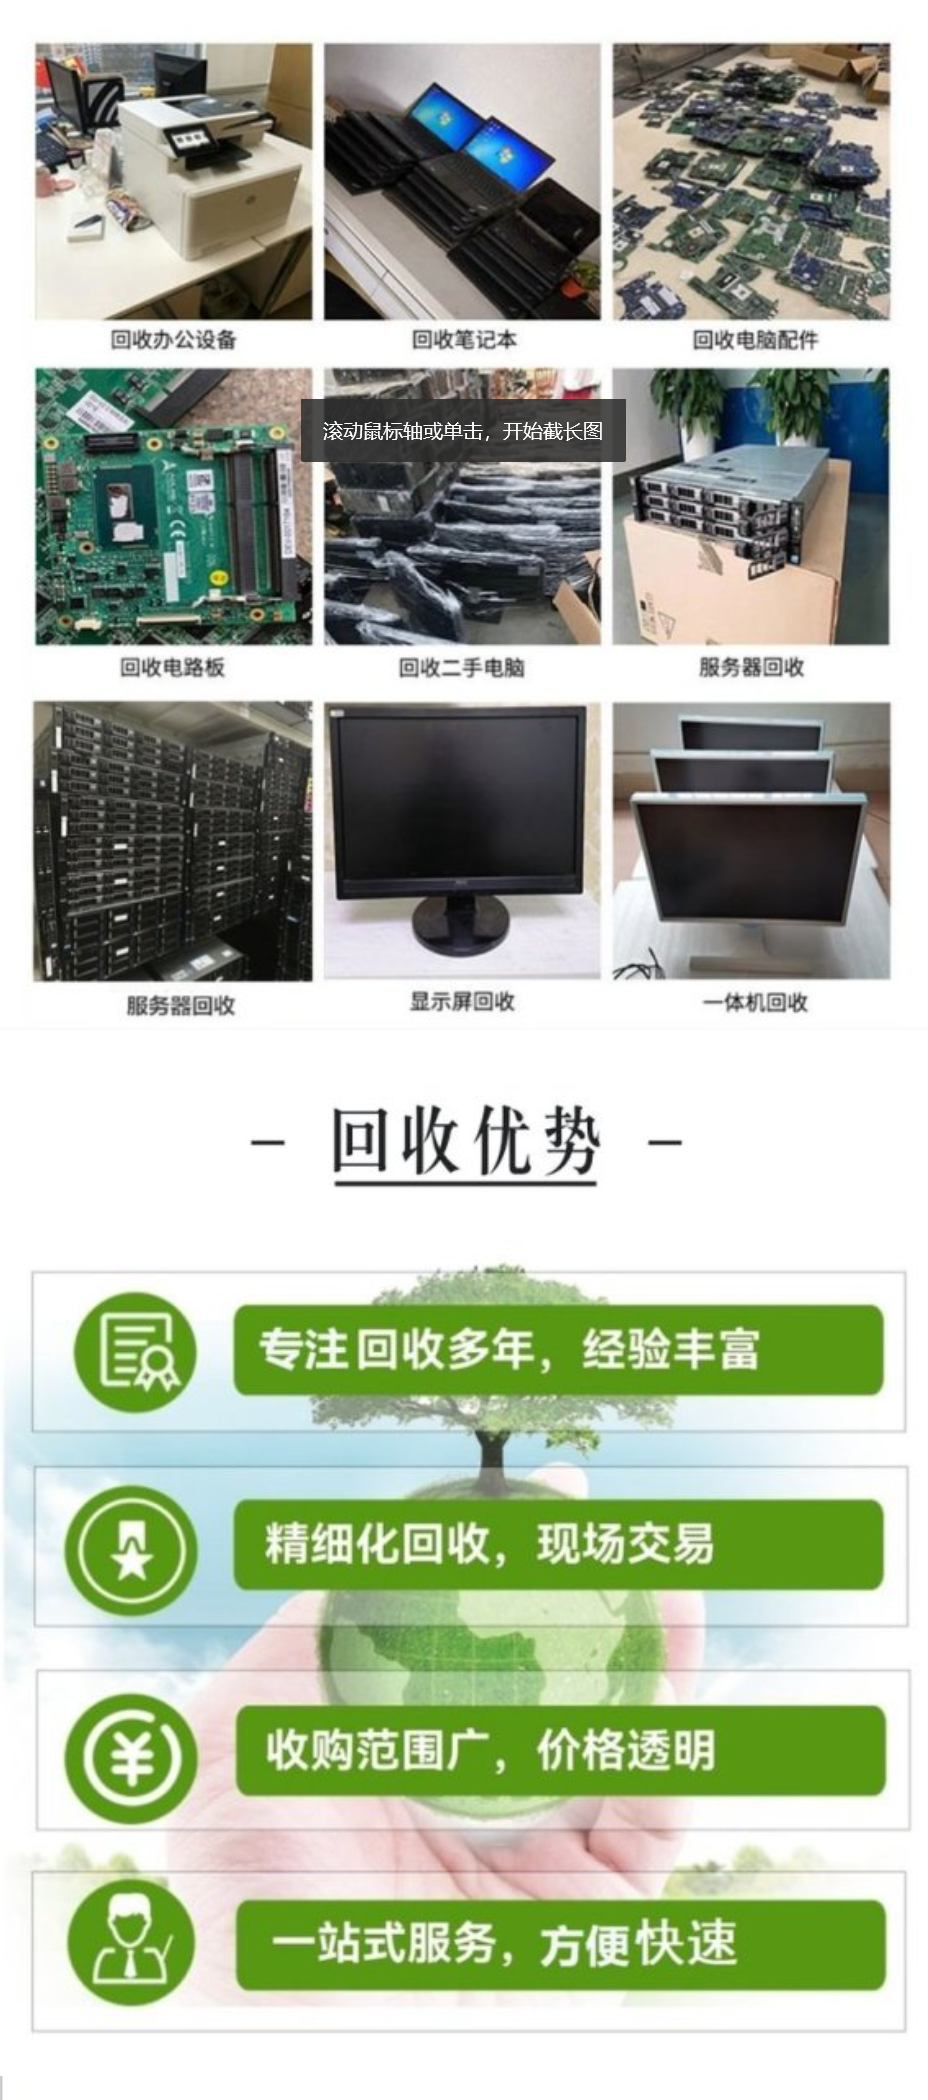 Camera exchange for second-hand computer exchange for new, no deposit rental for laptop, Apple all-in-one machine recycling